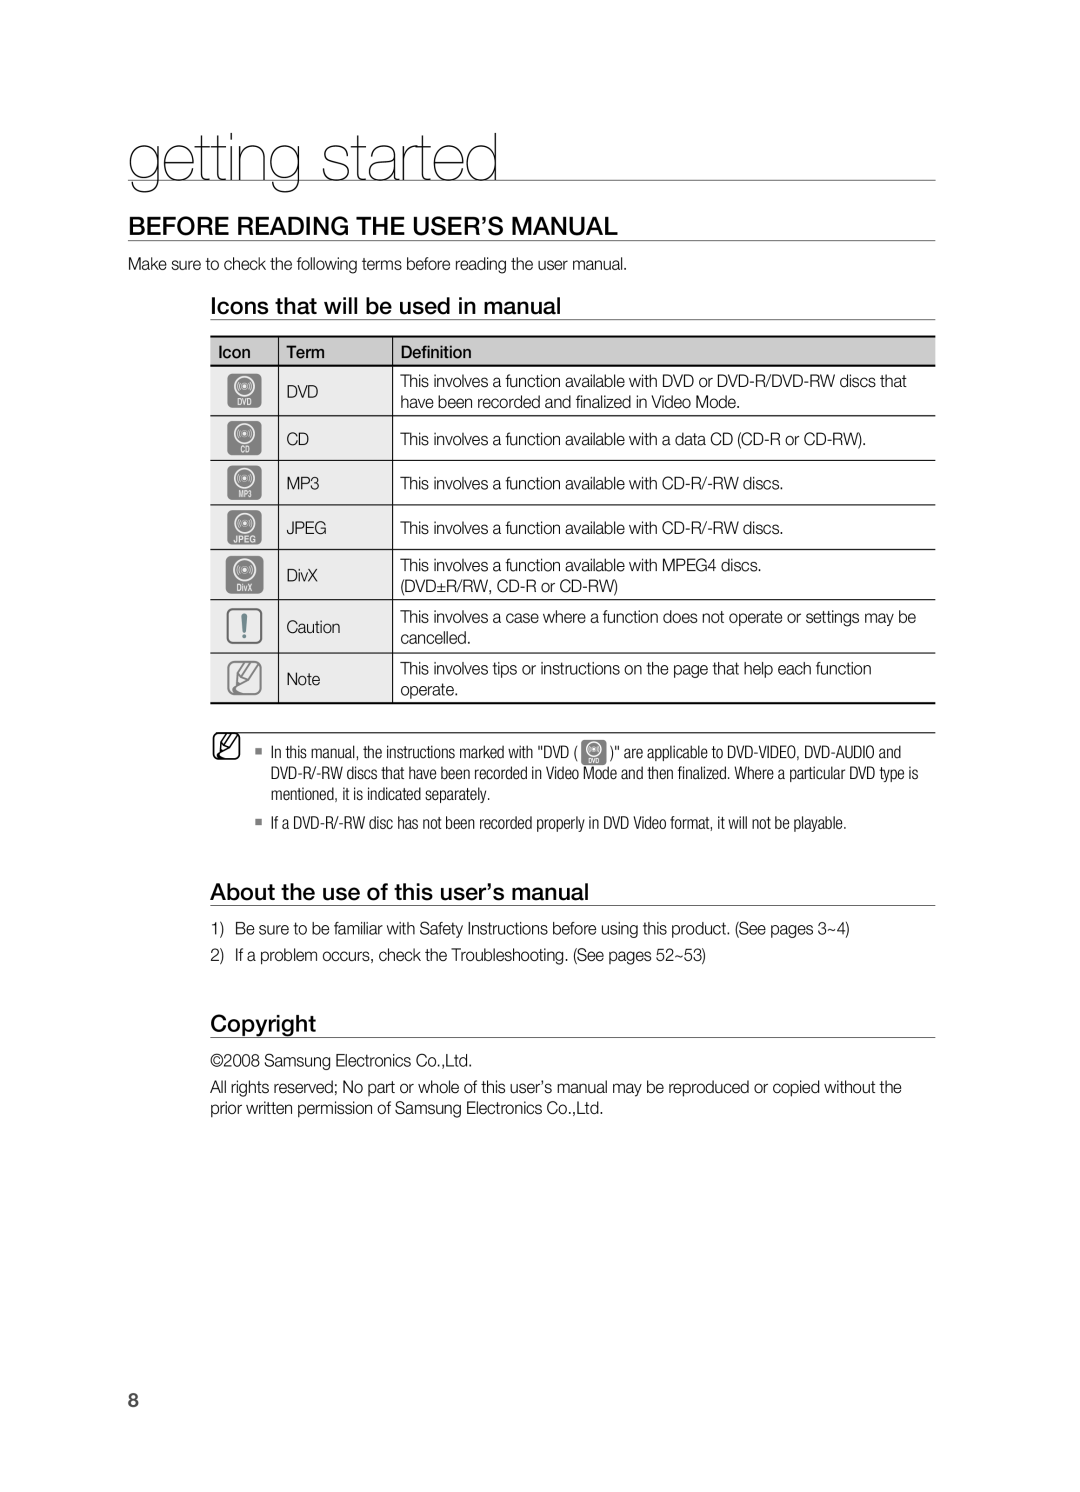 Samsung HT-X810 user manual getting started, Icons that will be used in manual, Copyright 